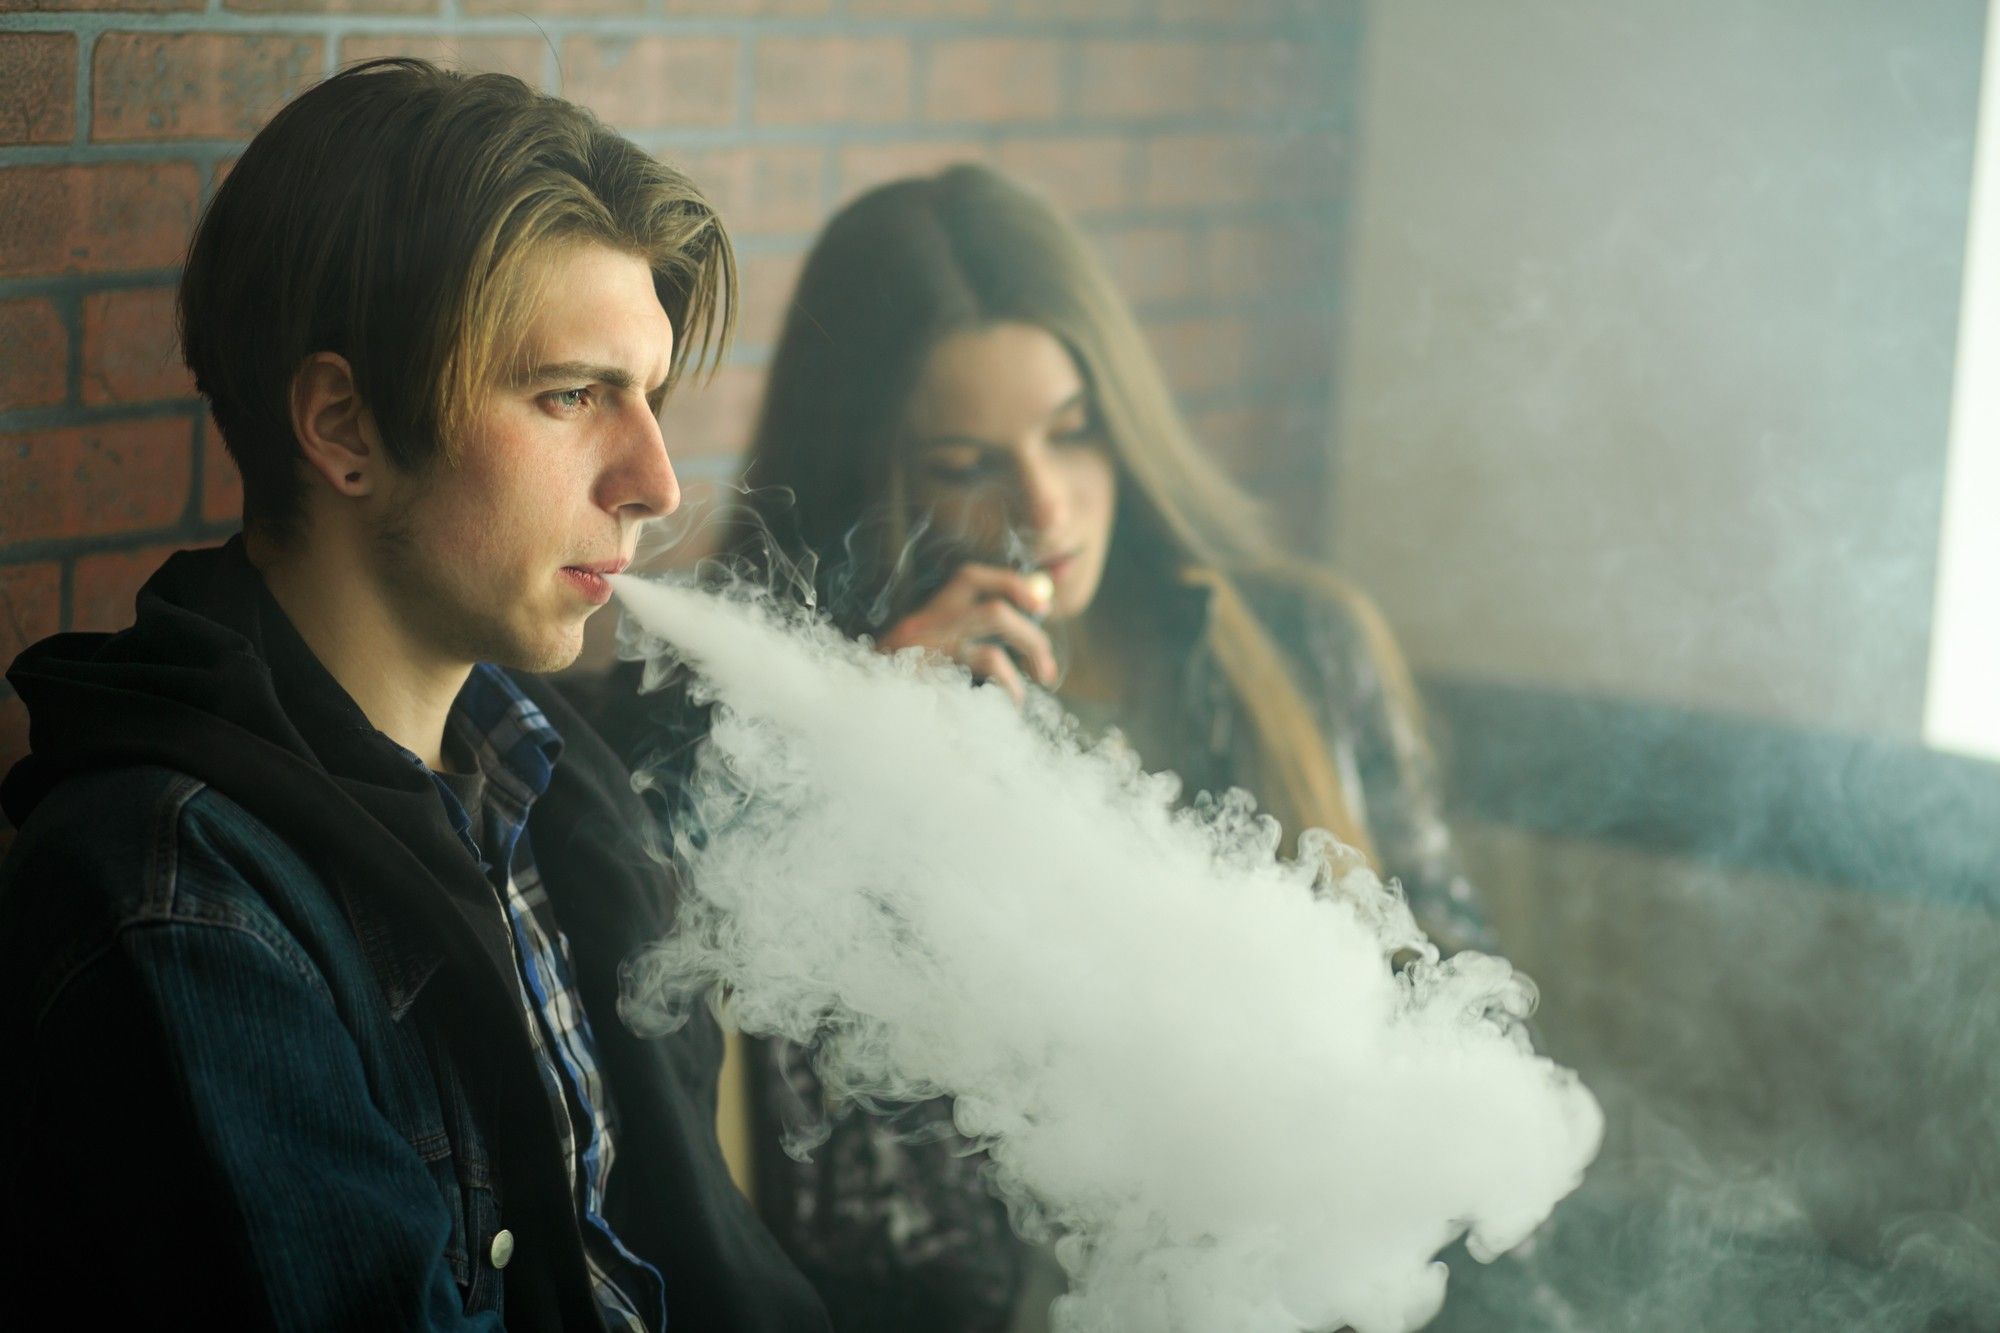 Vaping in schools puts young people at risk.